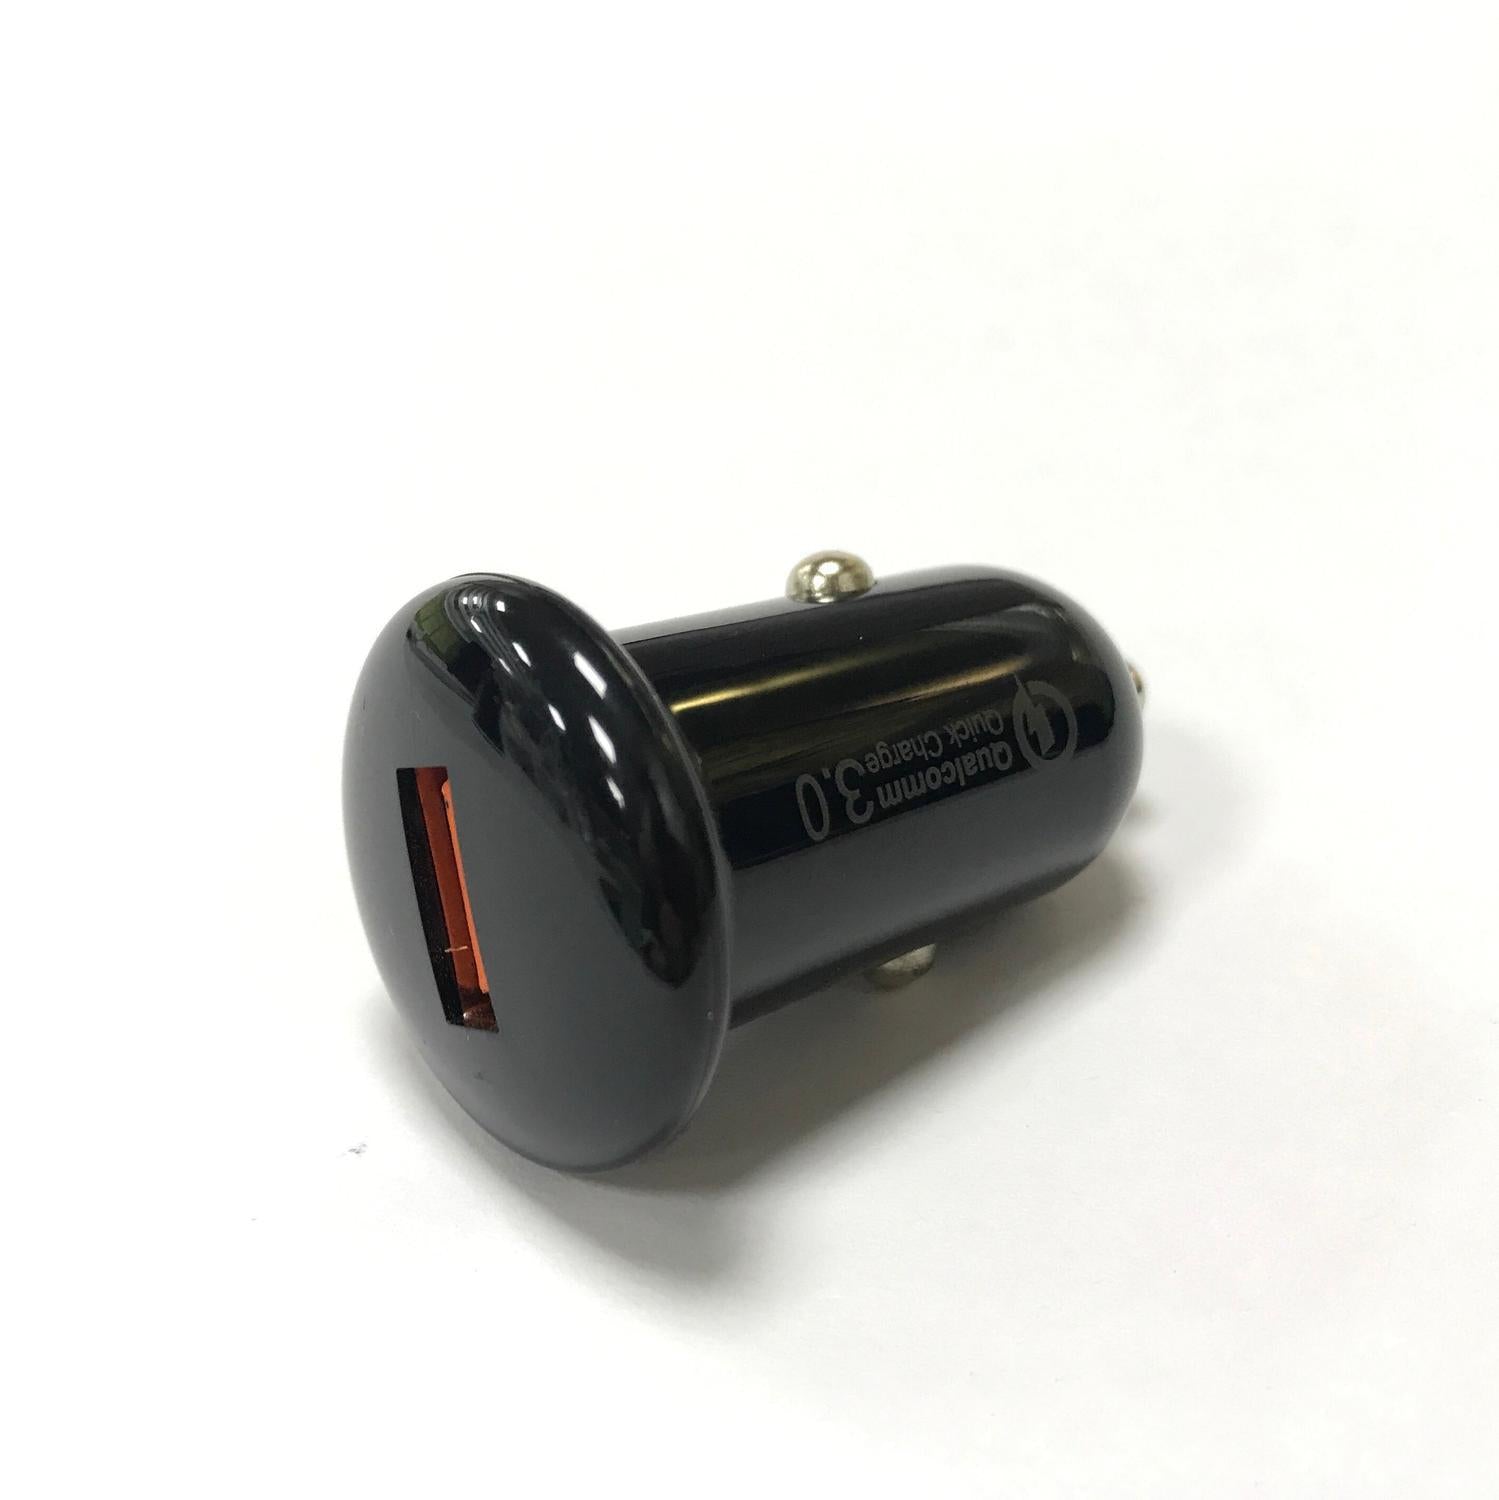 NÖRDIC USB Quick Car Charger Quick Charger 3.0 18W